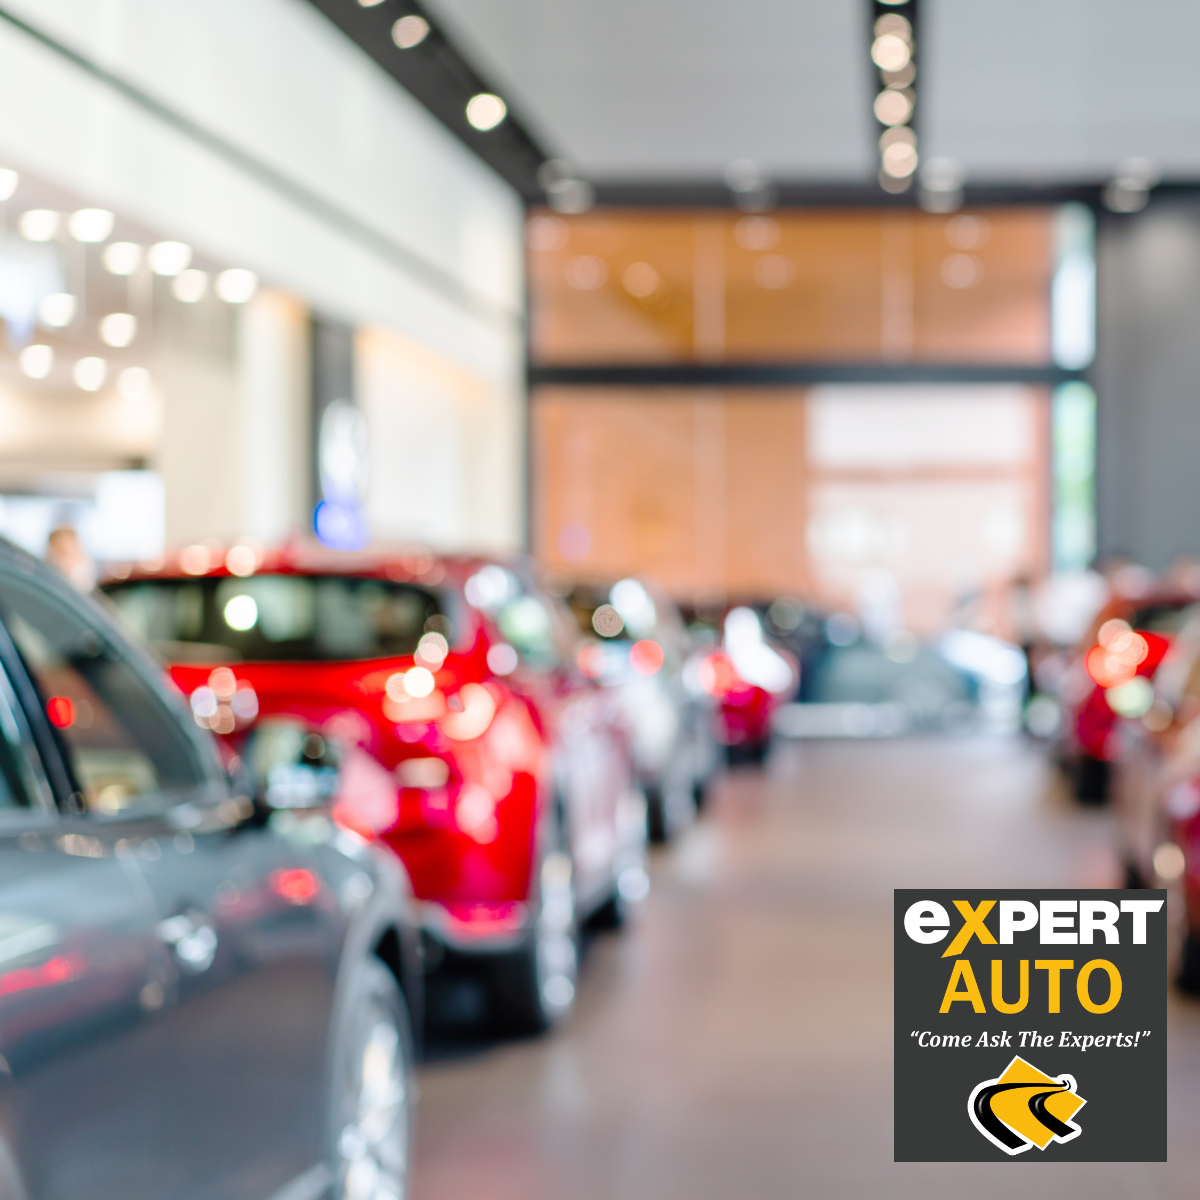 Are You Ready To Browse A Great Car Dealership Near Forestville?